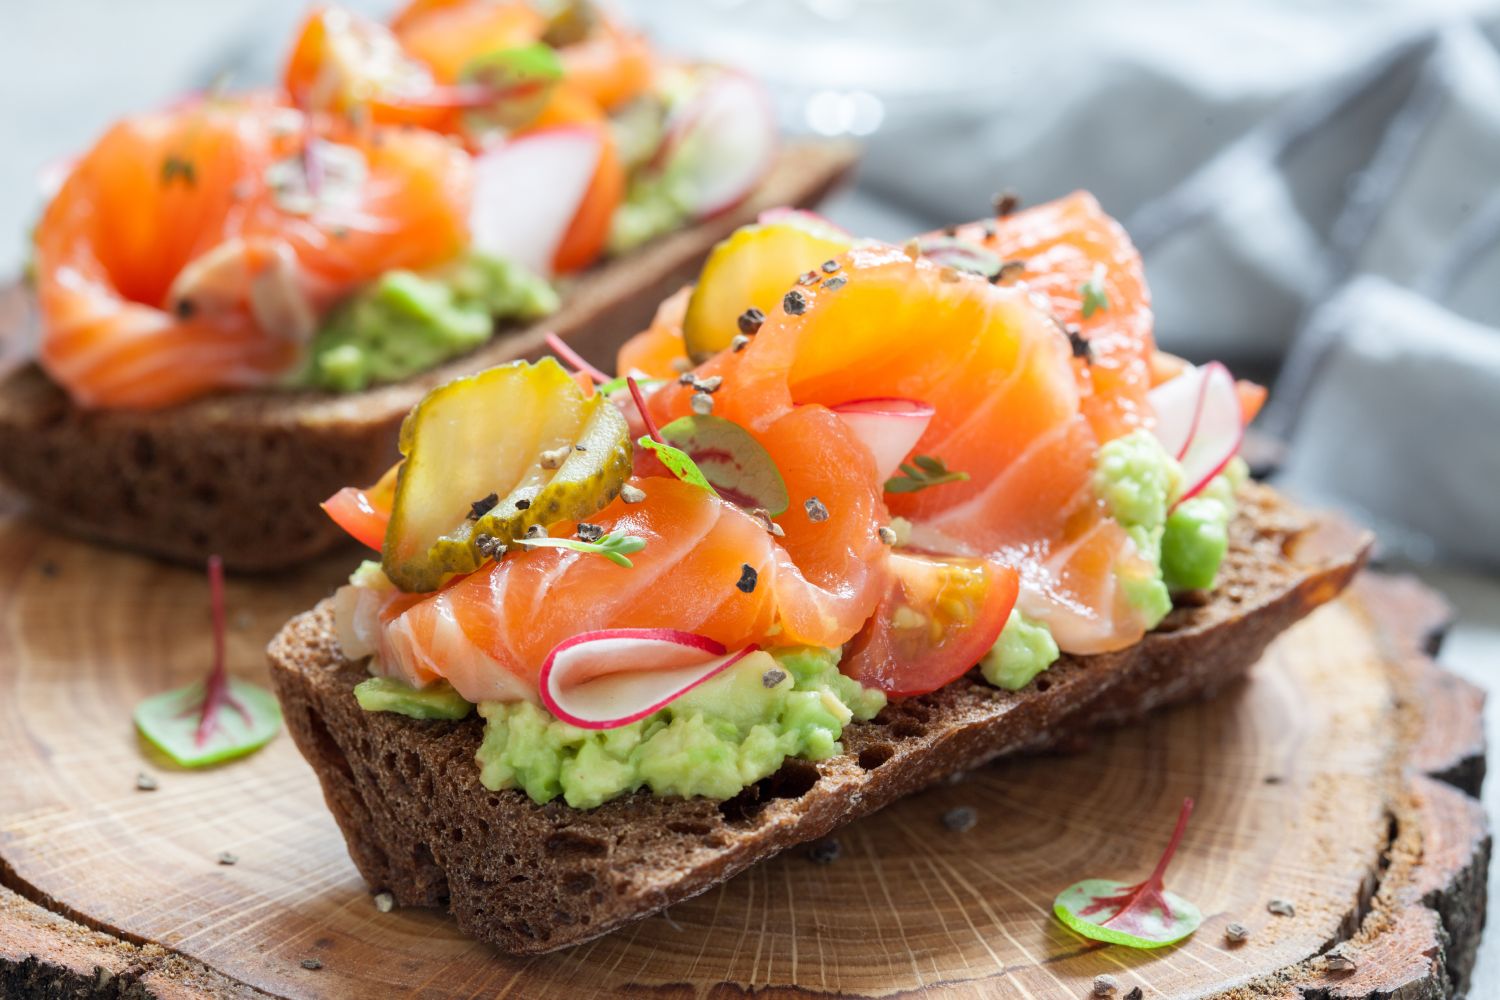 What To Eat With Smoked Salmon?